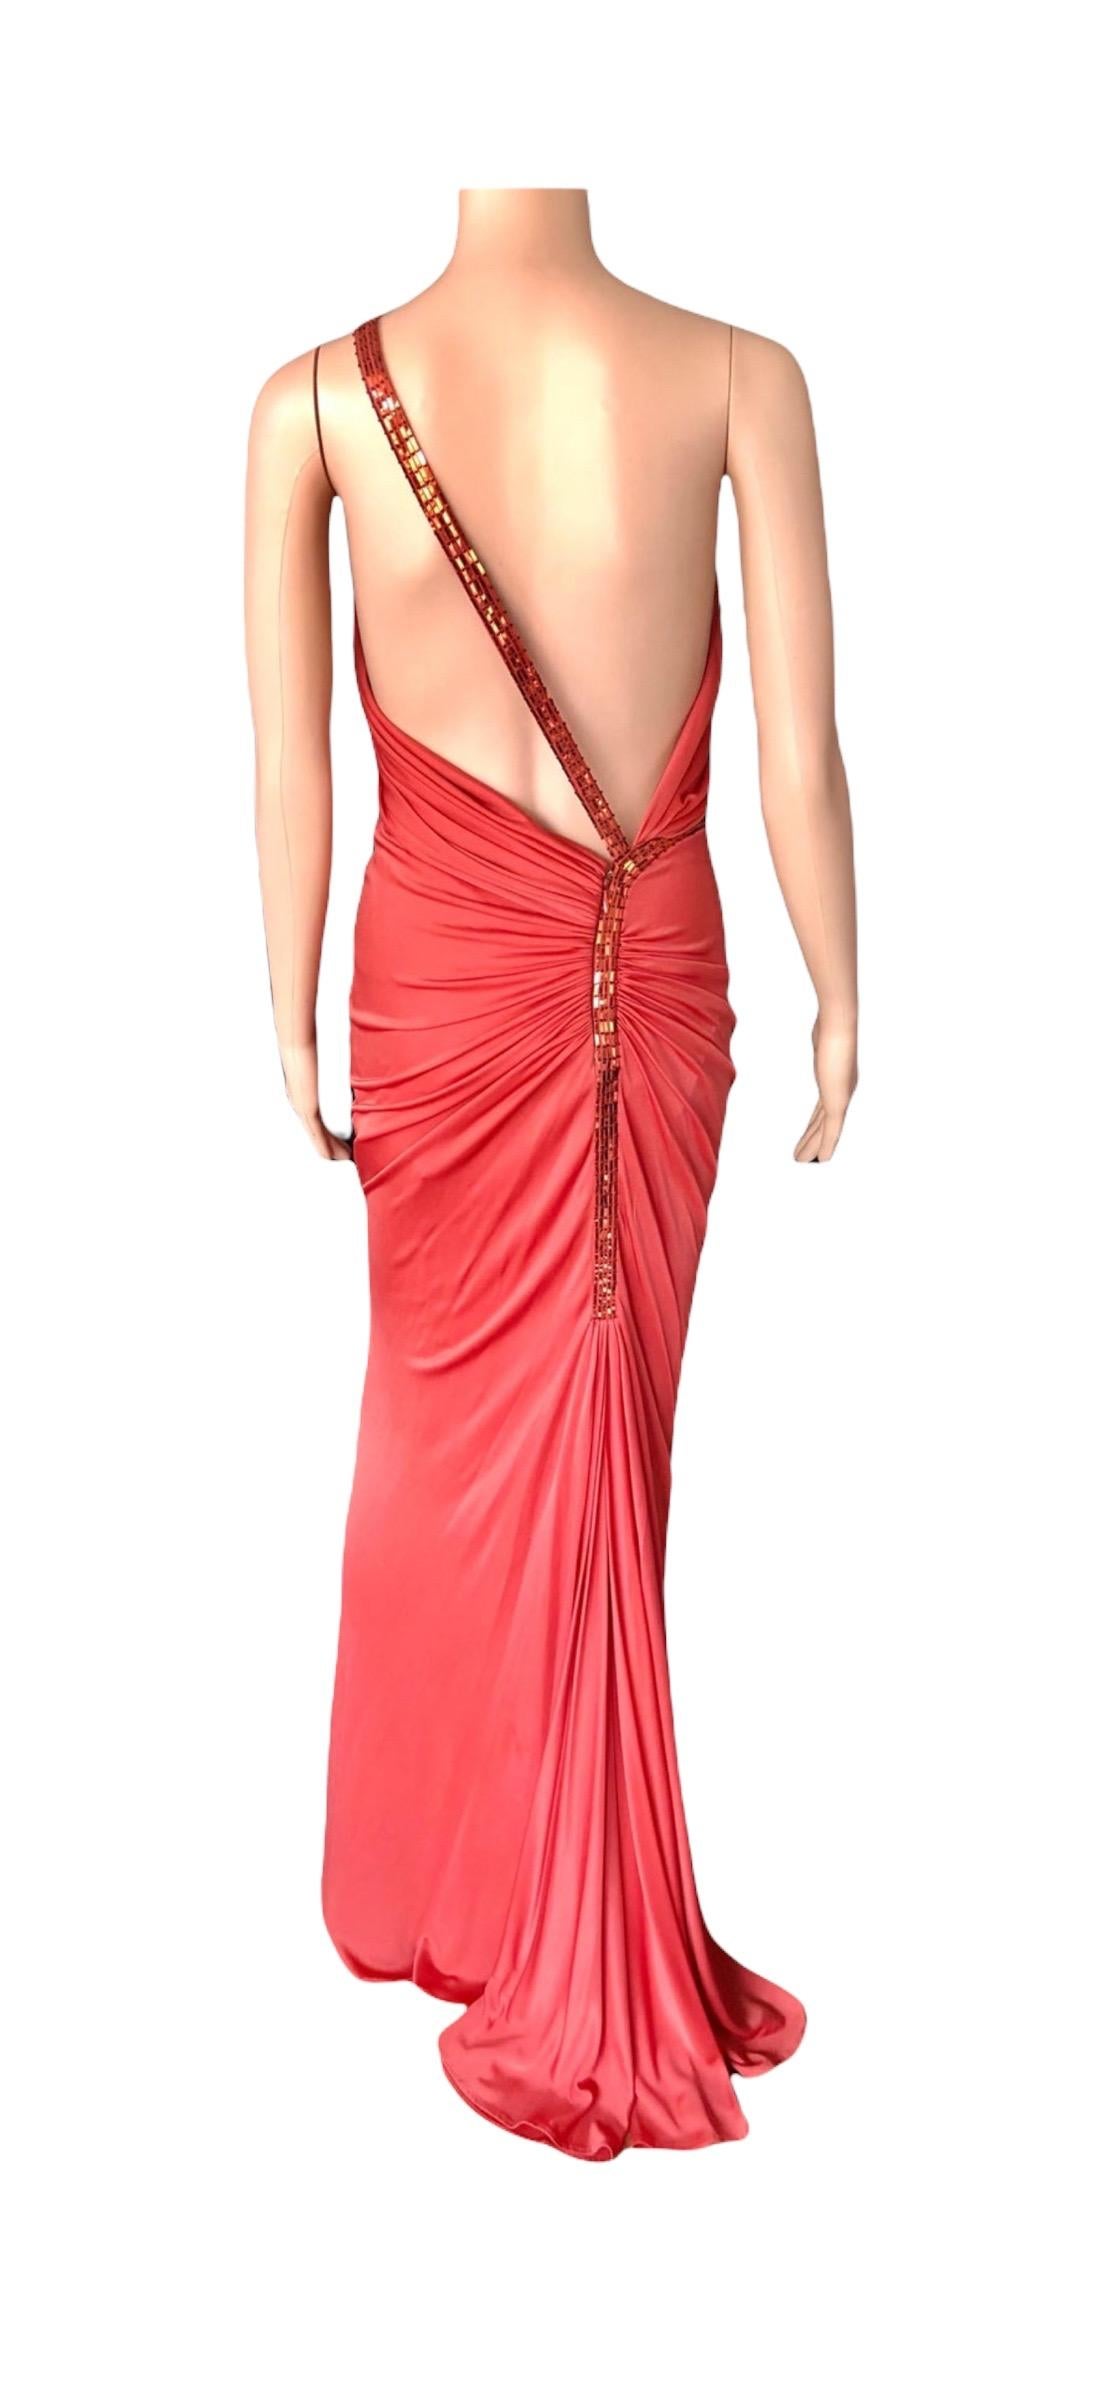 Gianni Versace S/S 2001 Runway Embellished Backless Evening Dress Gown For Sale 12